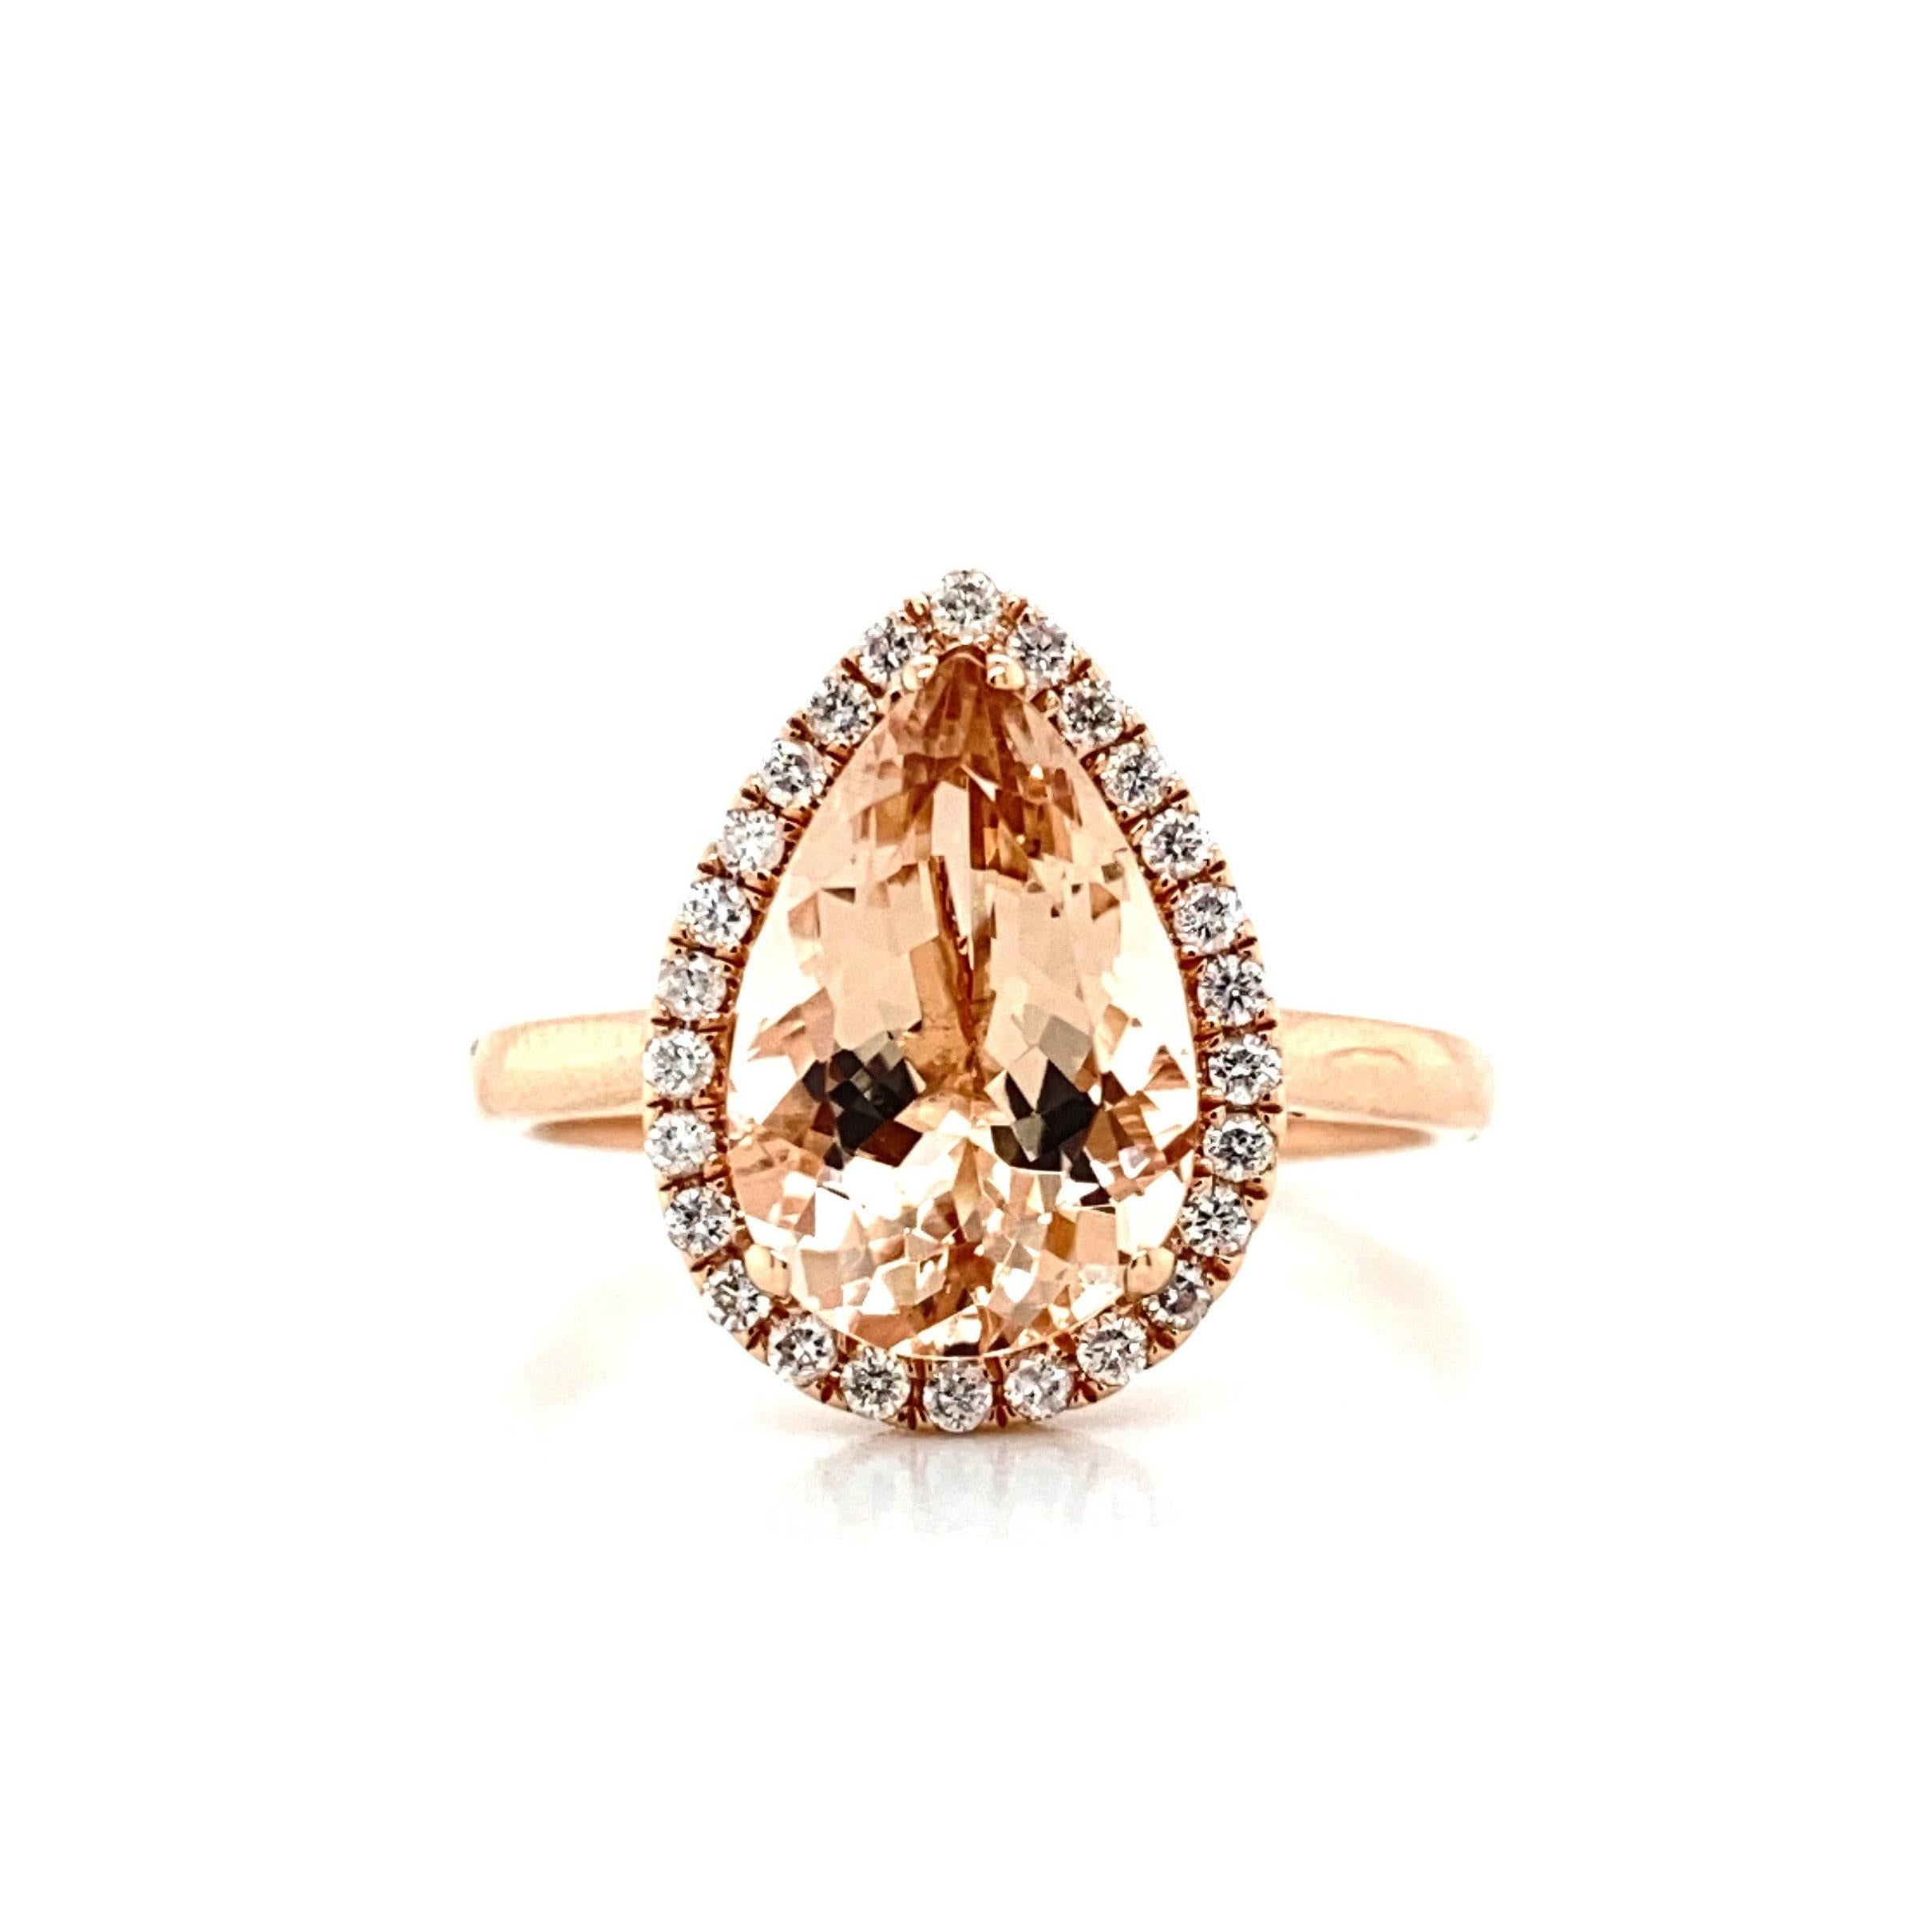 This flawless natural 2.79 carat morganite and diamond ring is set in solid 14K rose gold is a true showstopper. This ring has a natural 12x8MM pear cut morganite stone with excellent peachy pink color (AAA quality gem) and is surrounded by a dainty